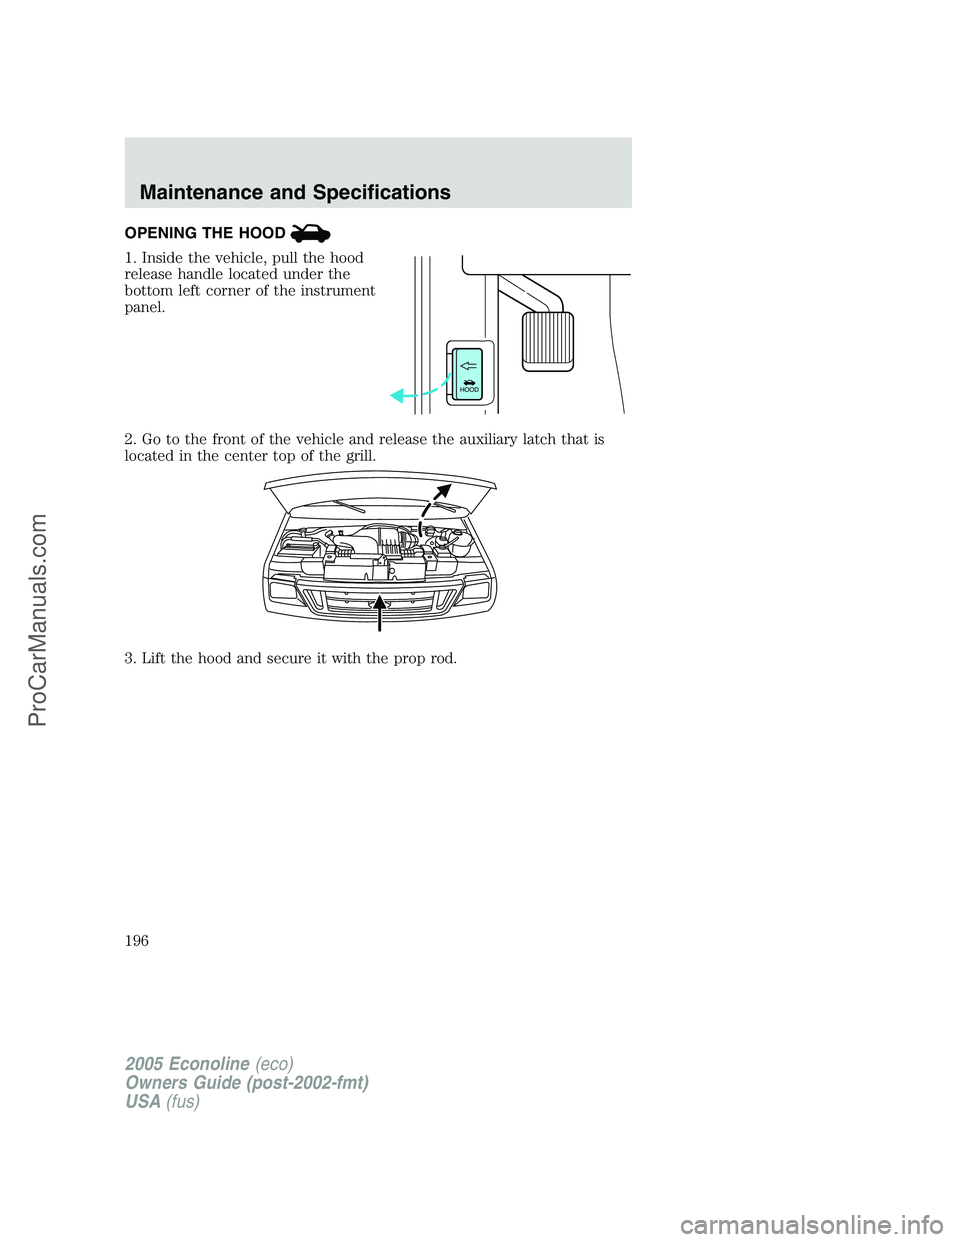 FORD E-150 2005  Owners Manual OPENING THE HOOD
1. Inside the vehicle, pull the hood
release handle located under the
bottom left corner of the instrument
panel.
2. Go to the front of the vehicle and release the auxiliary latch tha